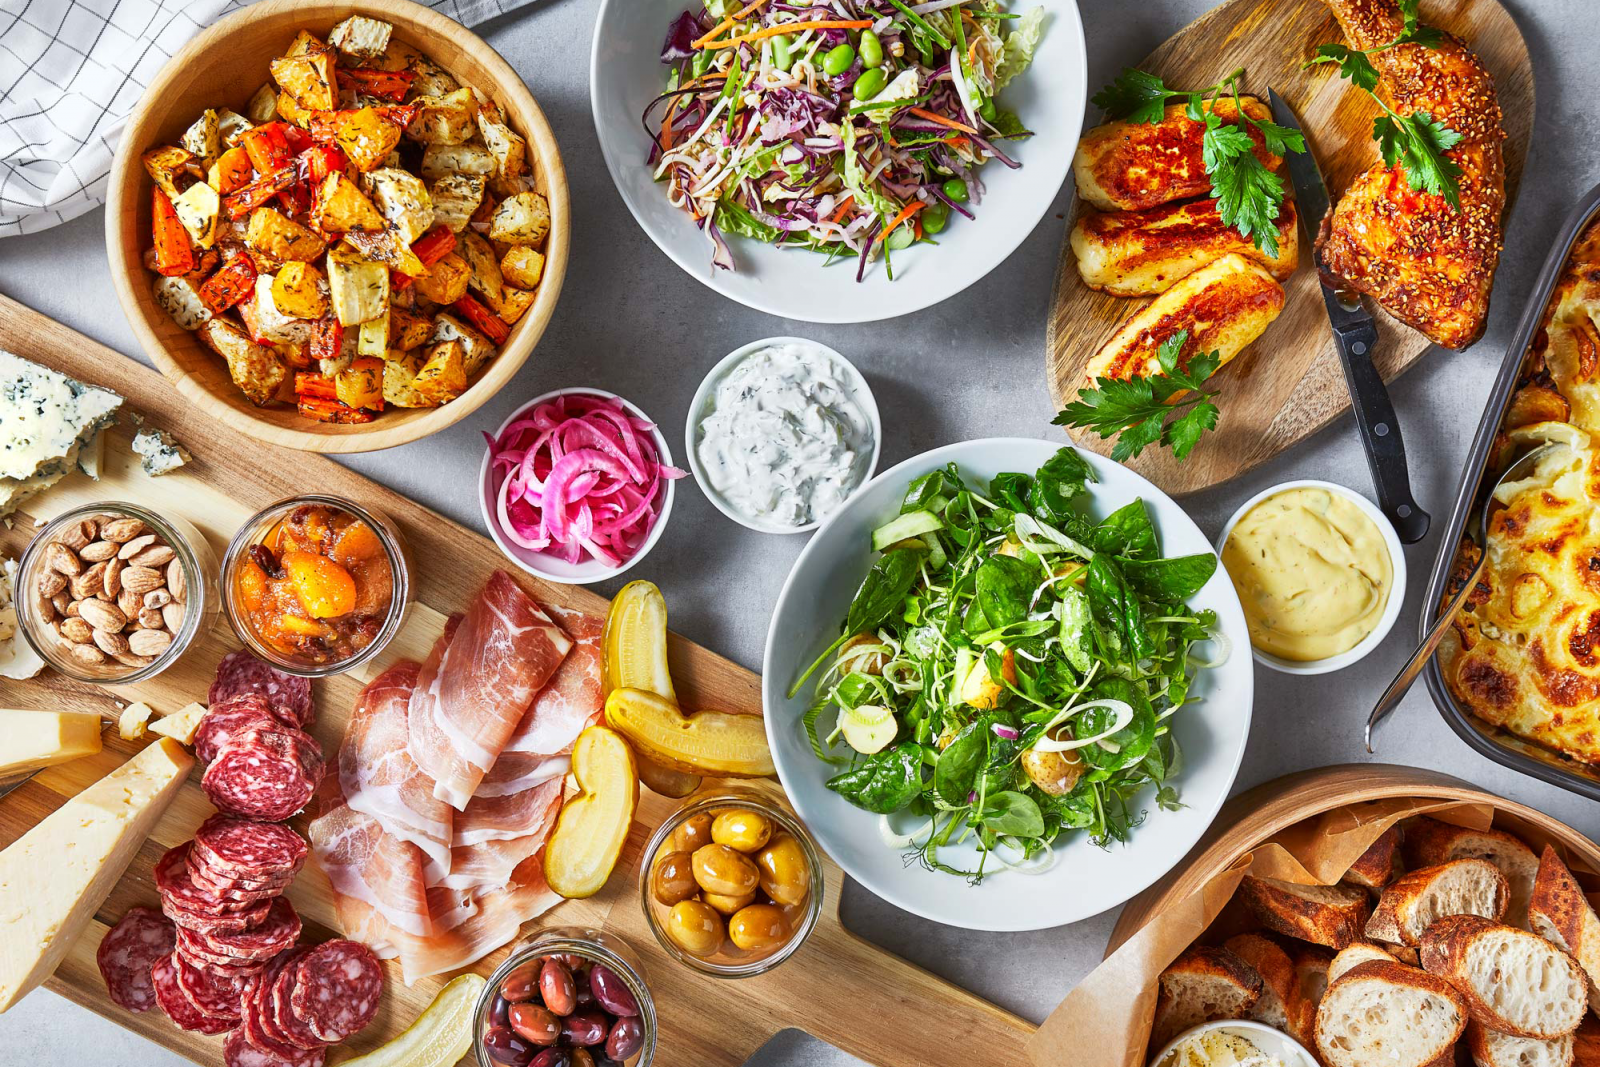 Table filled with salami, pickles, olives, sallad, potato sallad, bread, gravy and ham.